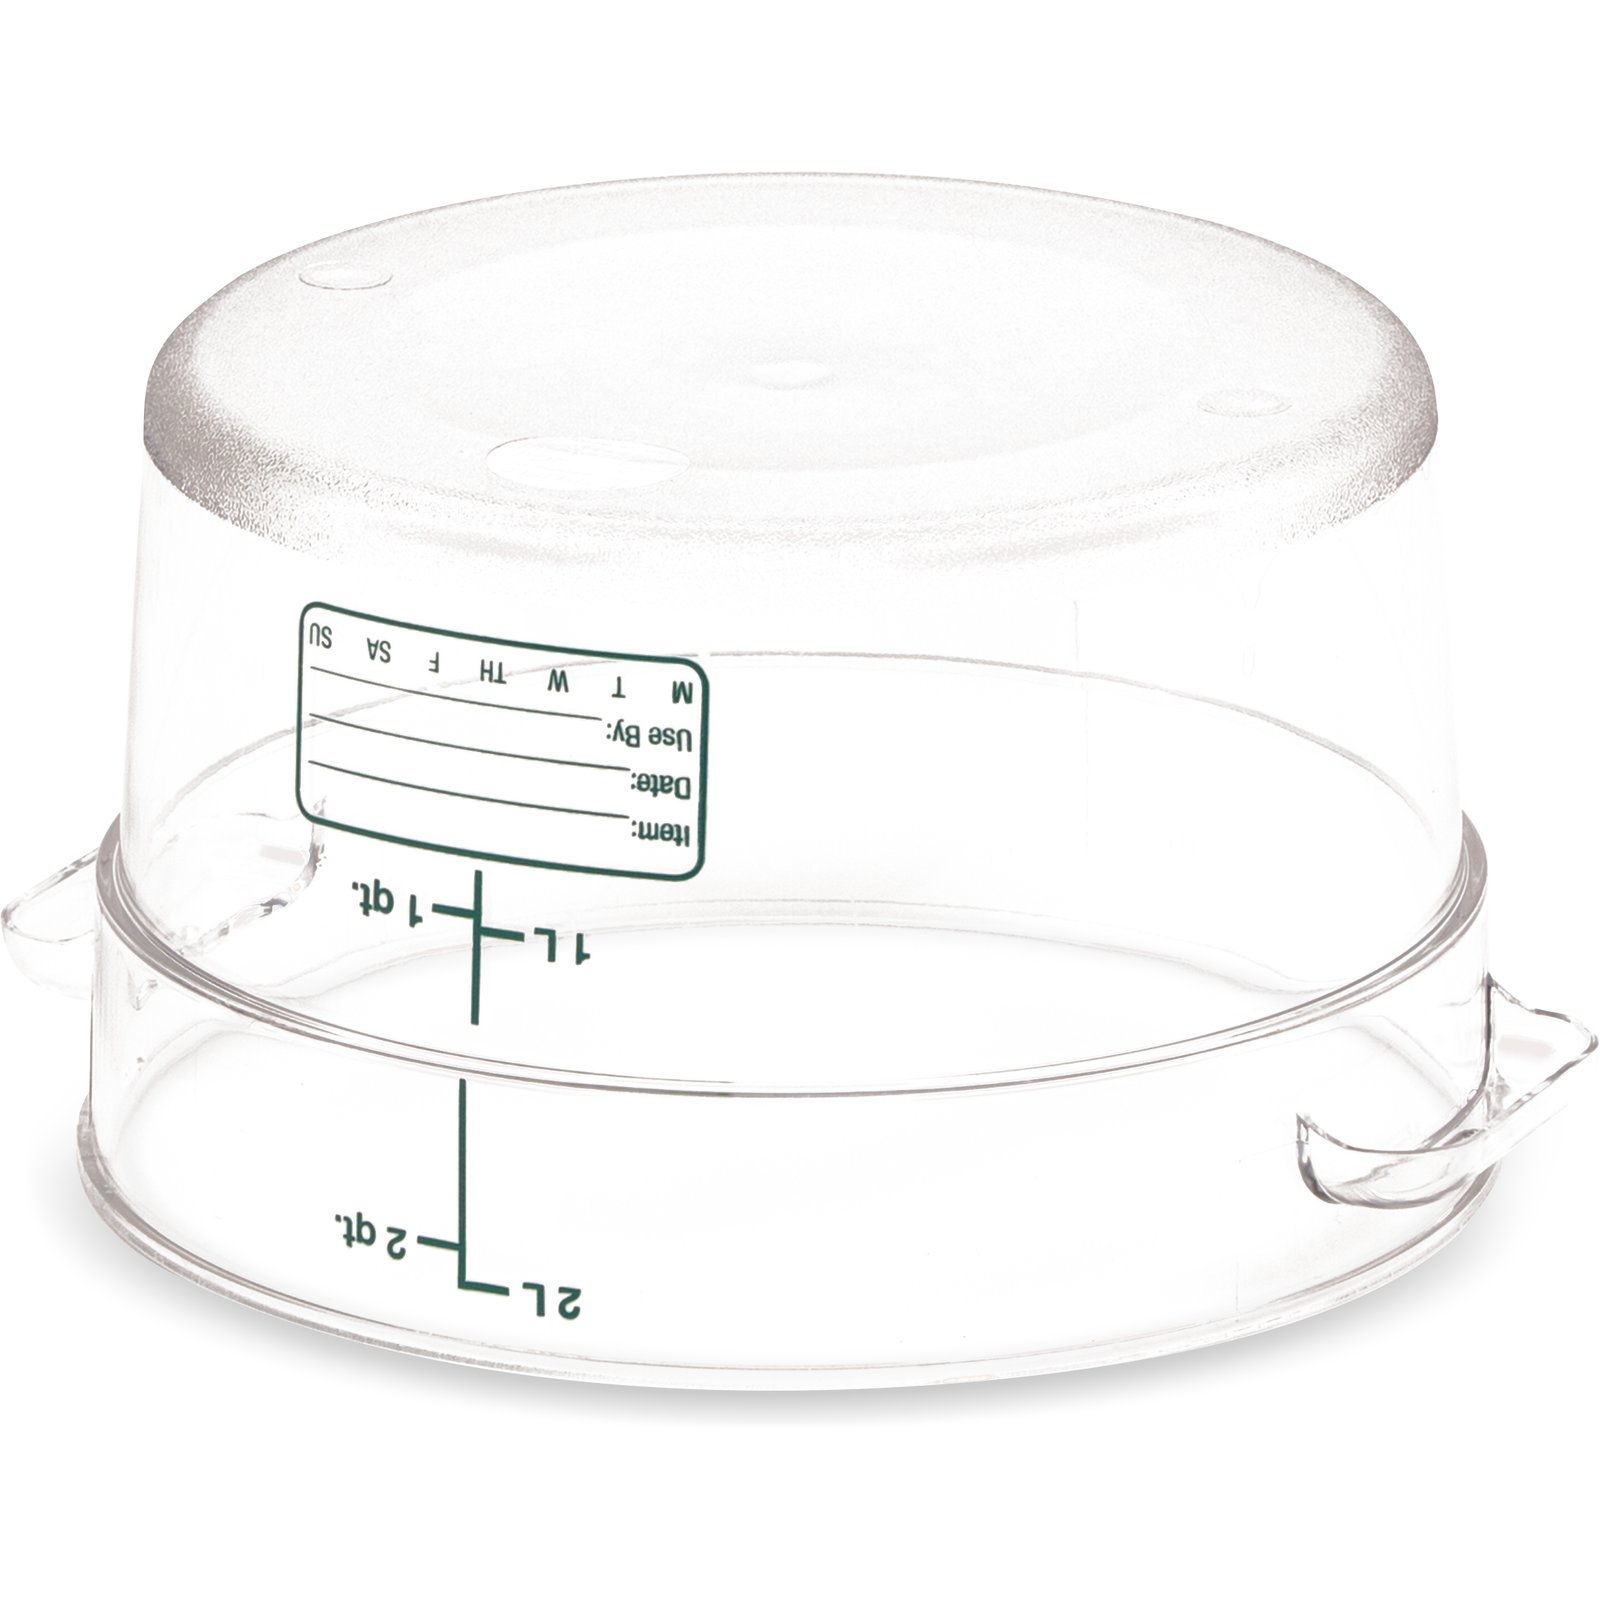 1076307 - StorPlus™ Round Food Storage Container 2 qt - Clear